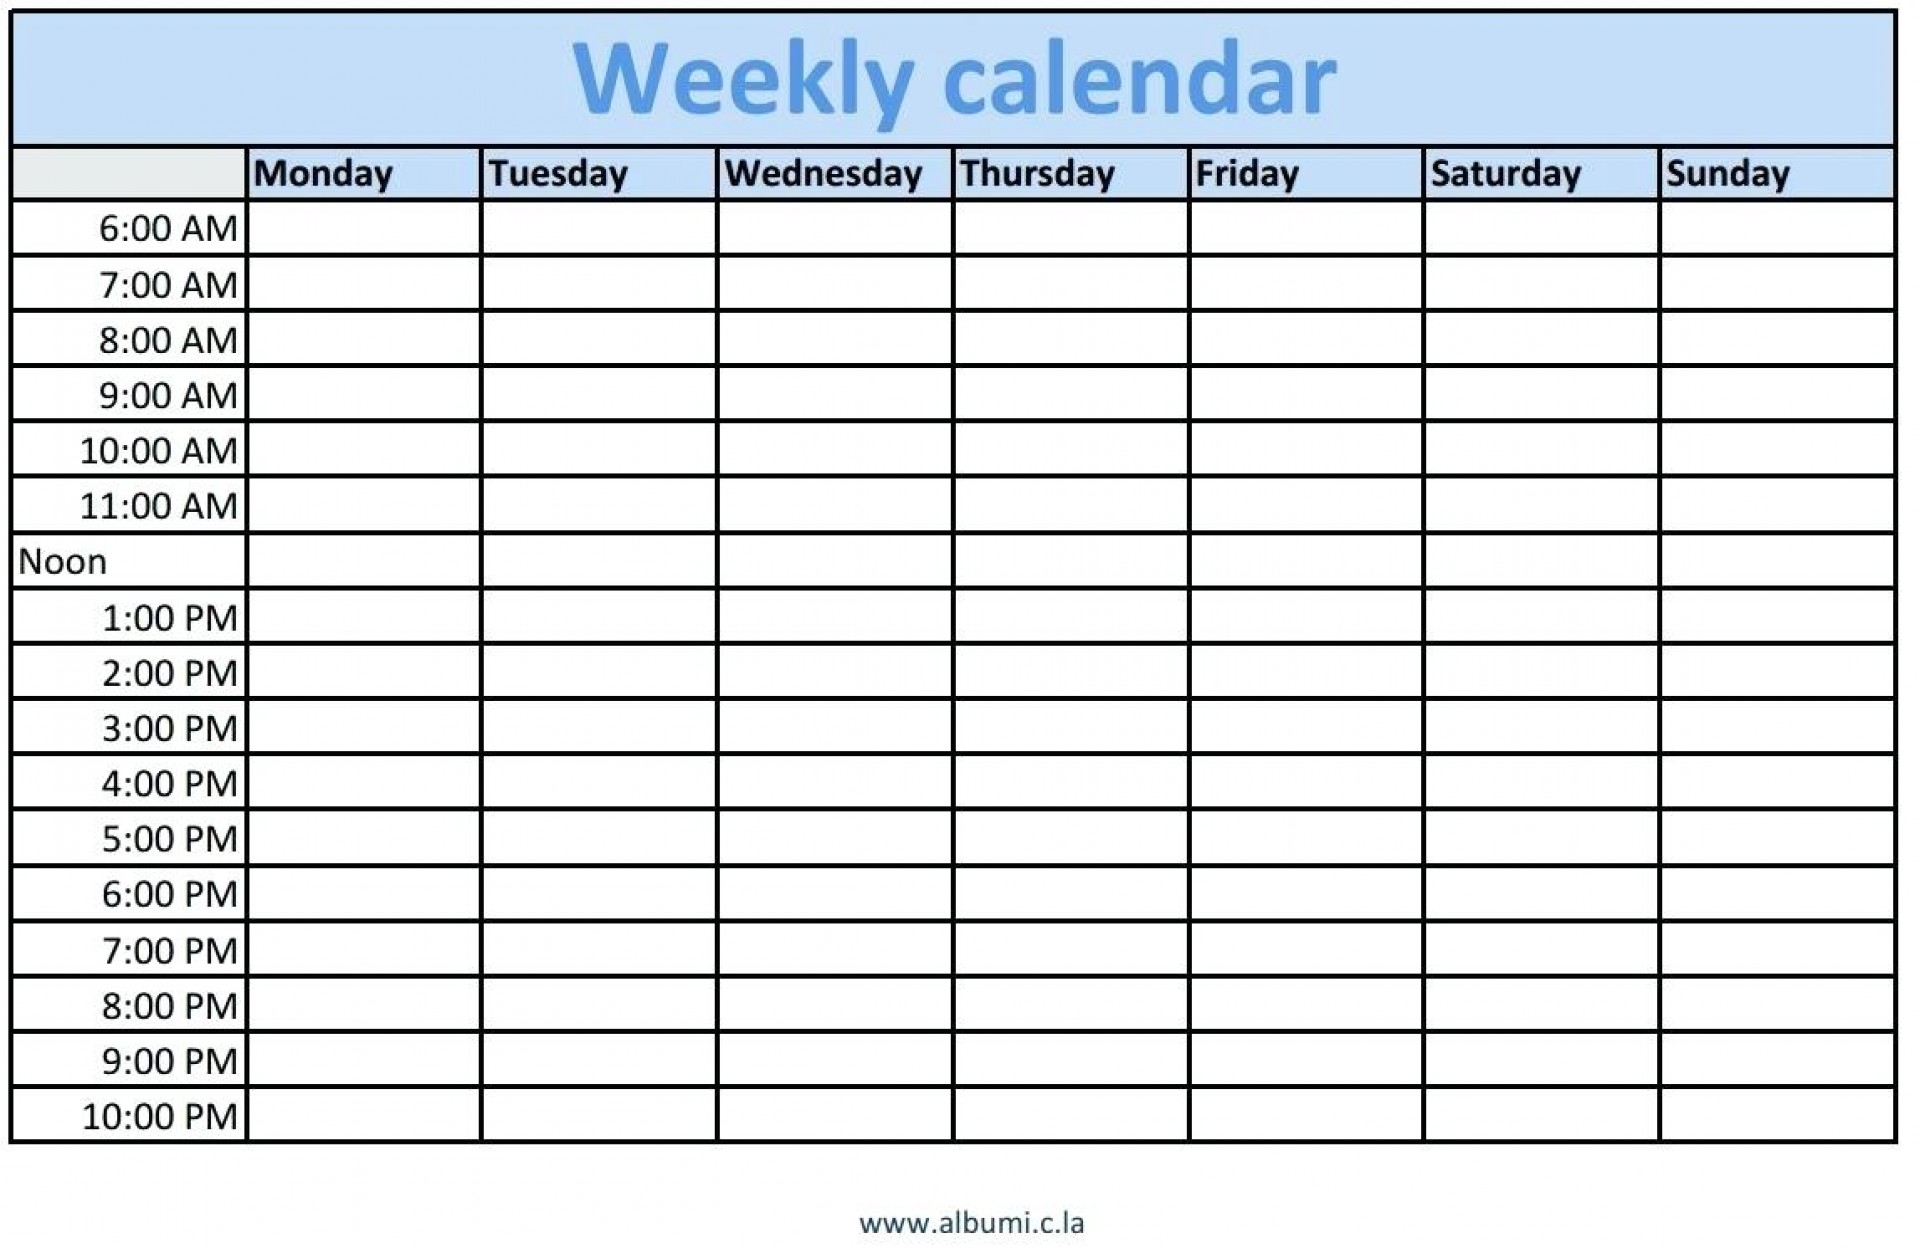 Printable Schedule Daily Shop Fresh Time Template Calendar With | Smorad with regard to Blank Sheet Lines Calendar With Time Slots